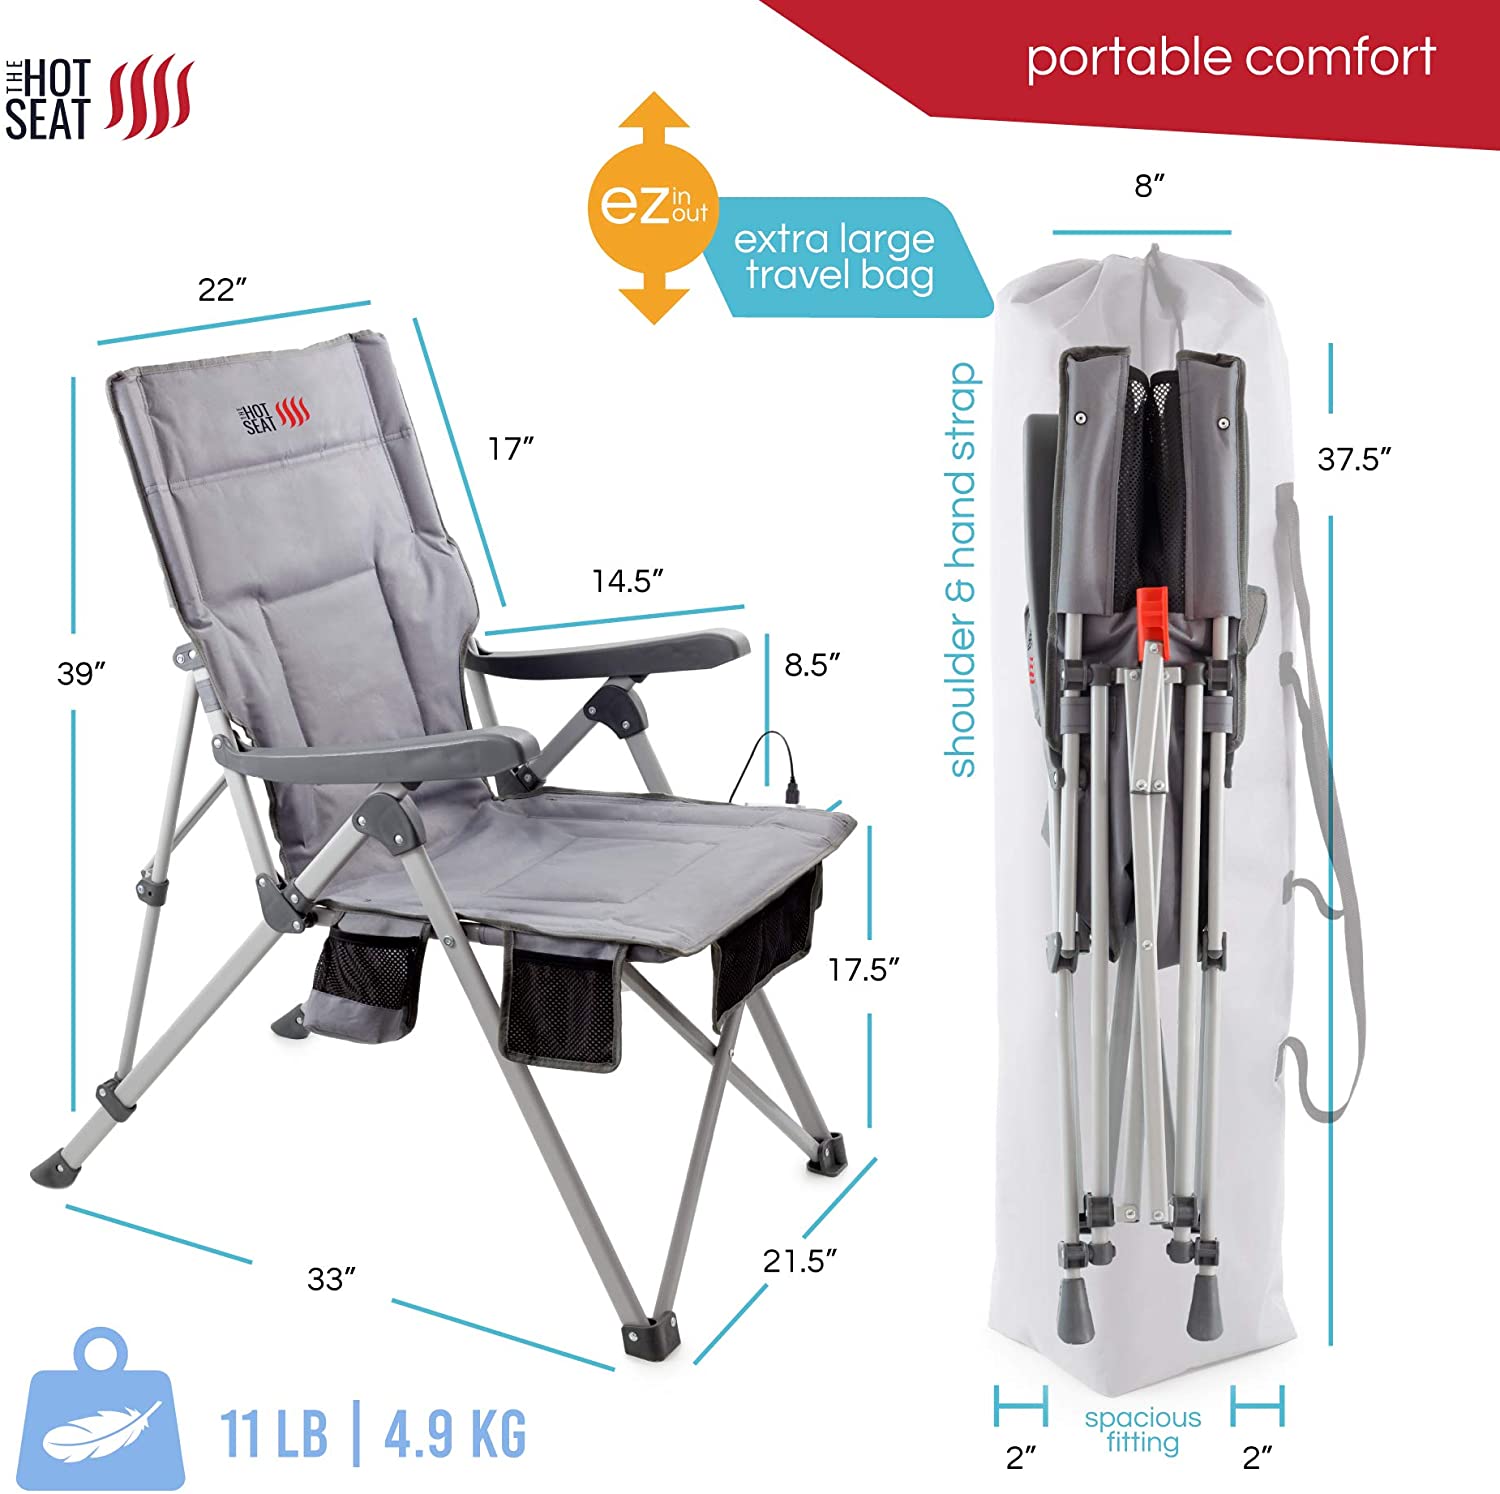 Heated Camping Chair - Electric folding camping chair with heated seat